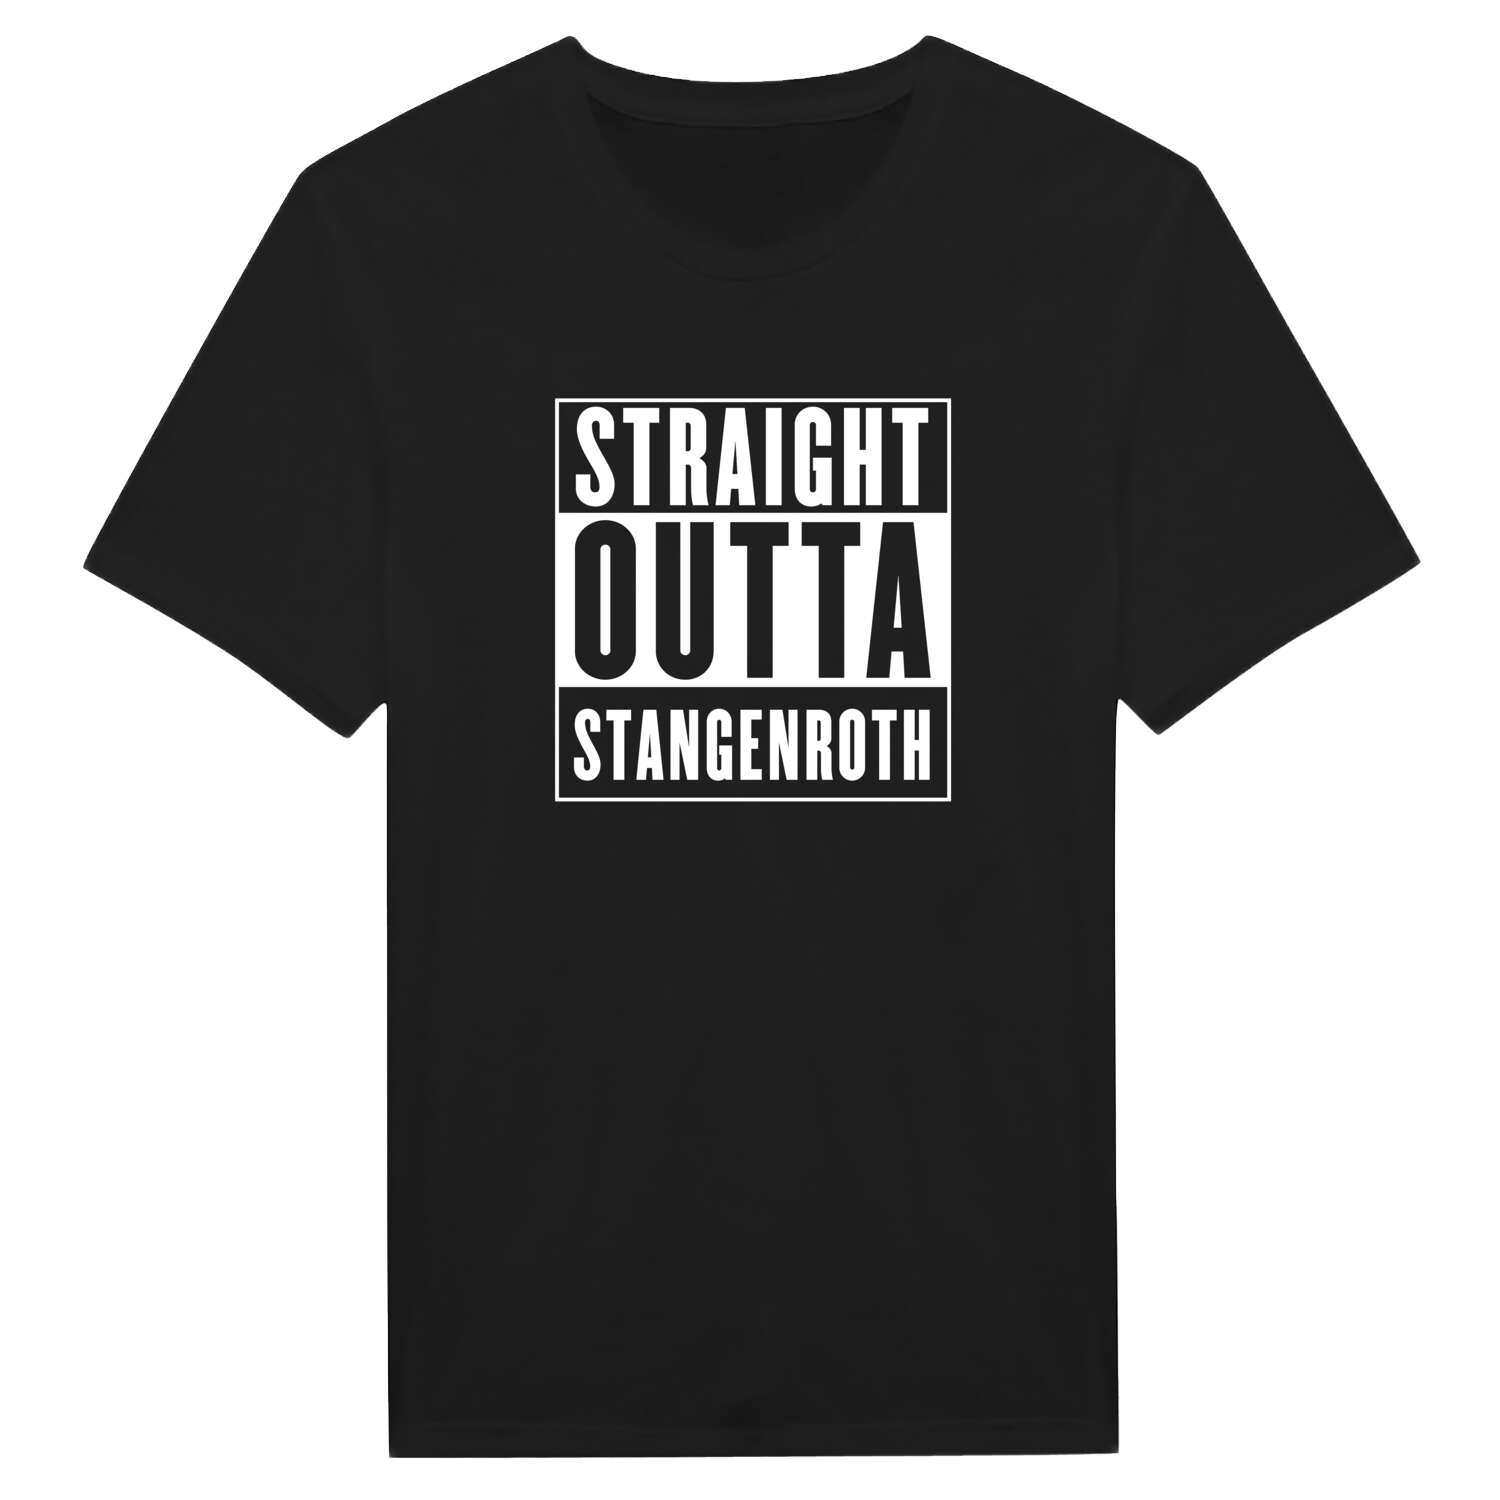 Stangenroth T-Shirt »Straight Outta«